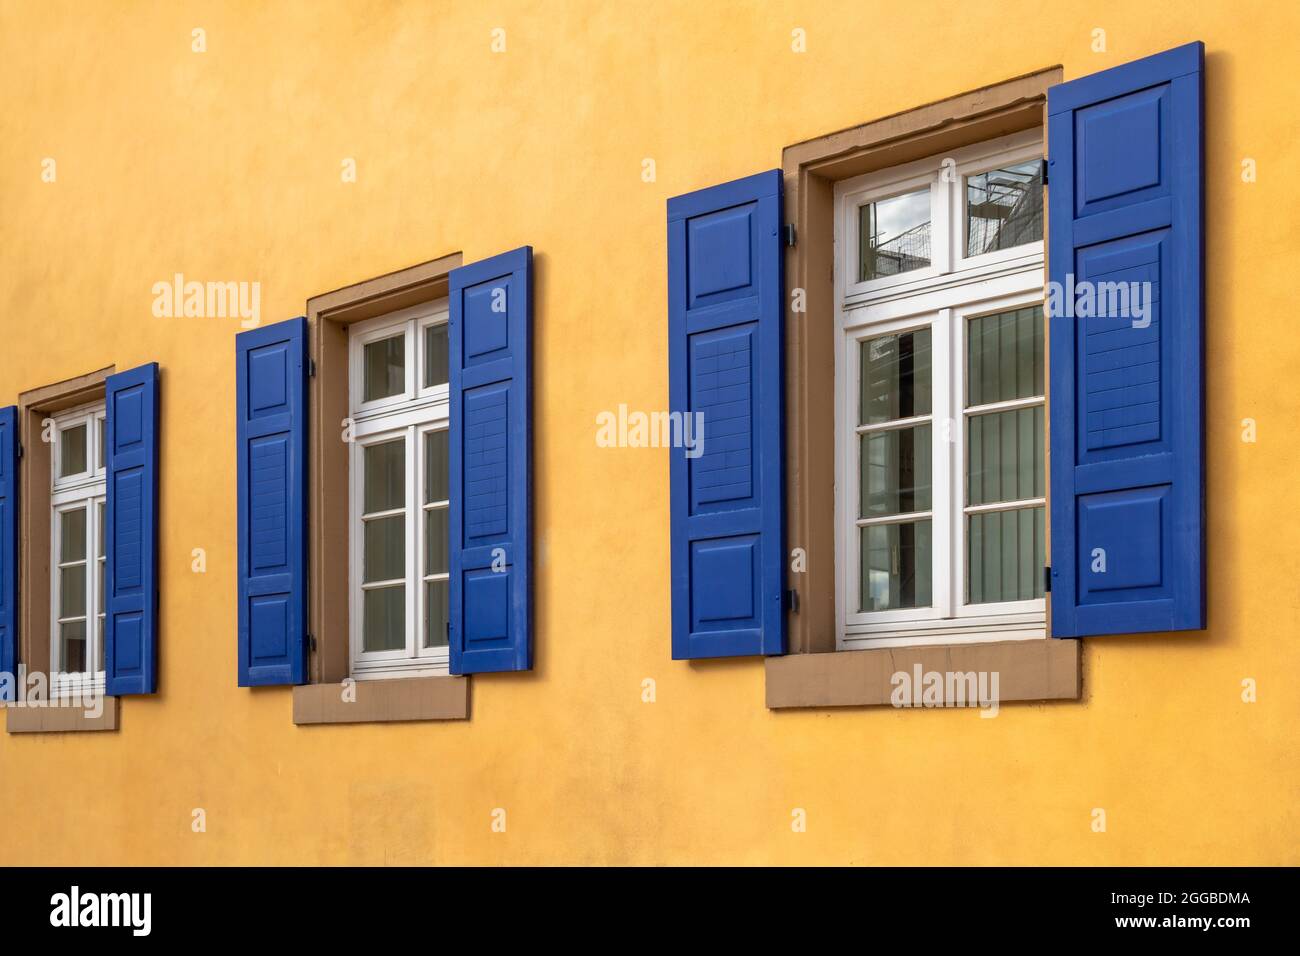 three white windows with sandstone sills in a row with dark blue shutters and a house wall painted orange yellow Stock Photo